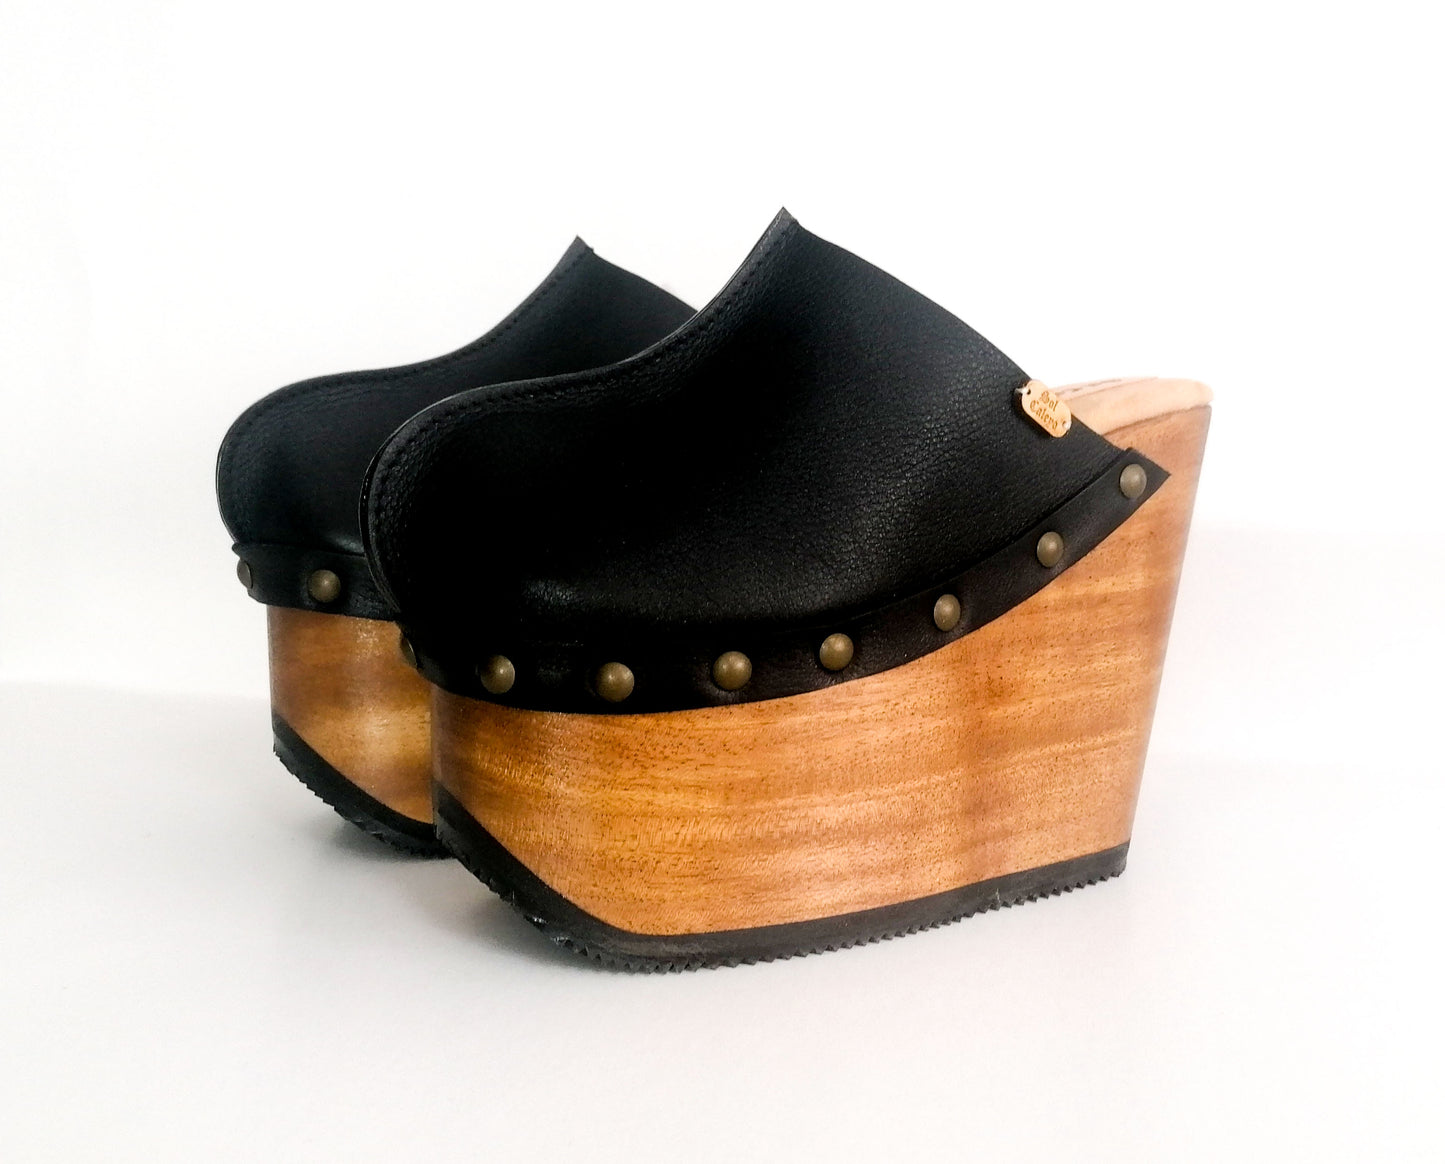 Black platform clog vintage style 70s. Super high wooden wedge, closed leather clogs, vintage style wooden wedge. Sizes 34 to 47. High quality leather shoes handmade by Sol Caleyo.